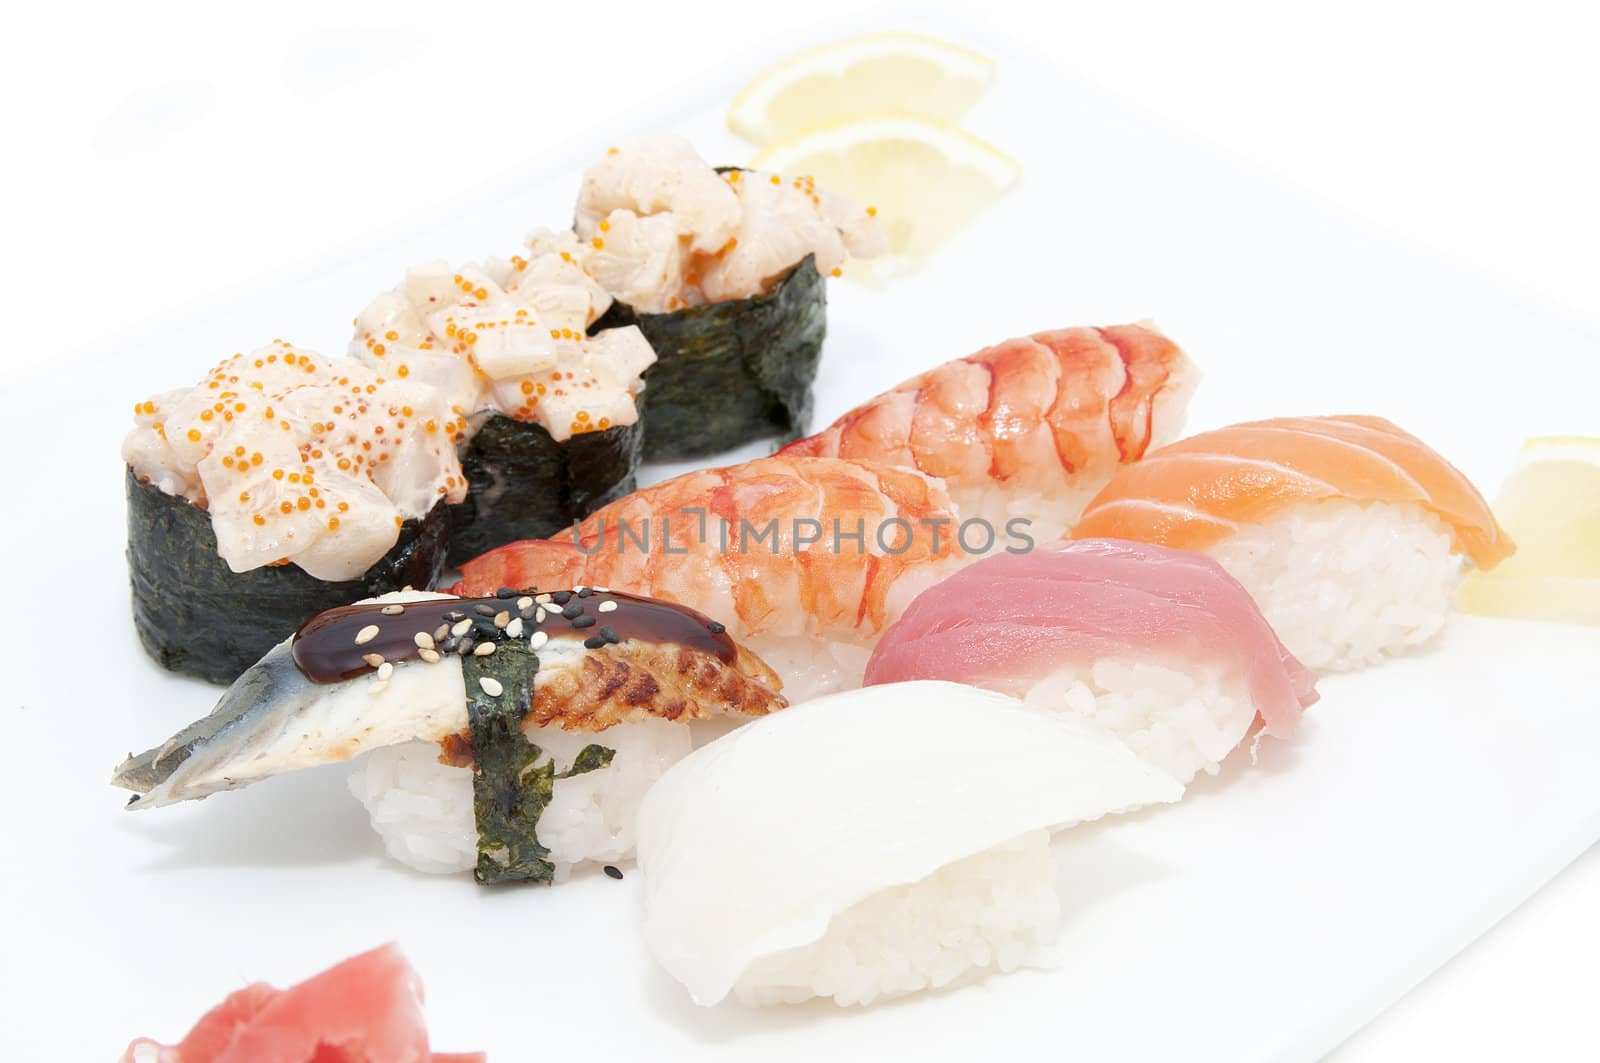 Japanese sushi fish and seafood by Lester120